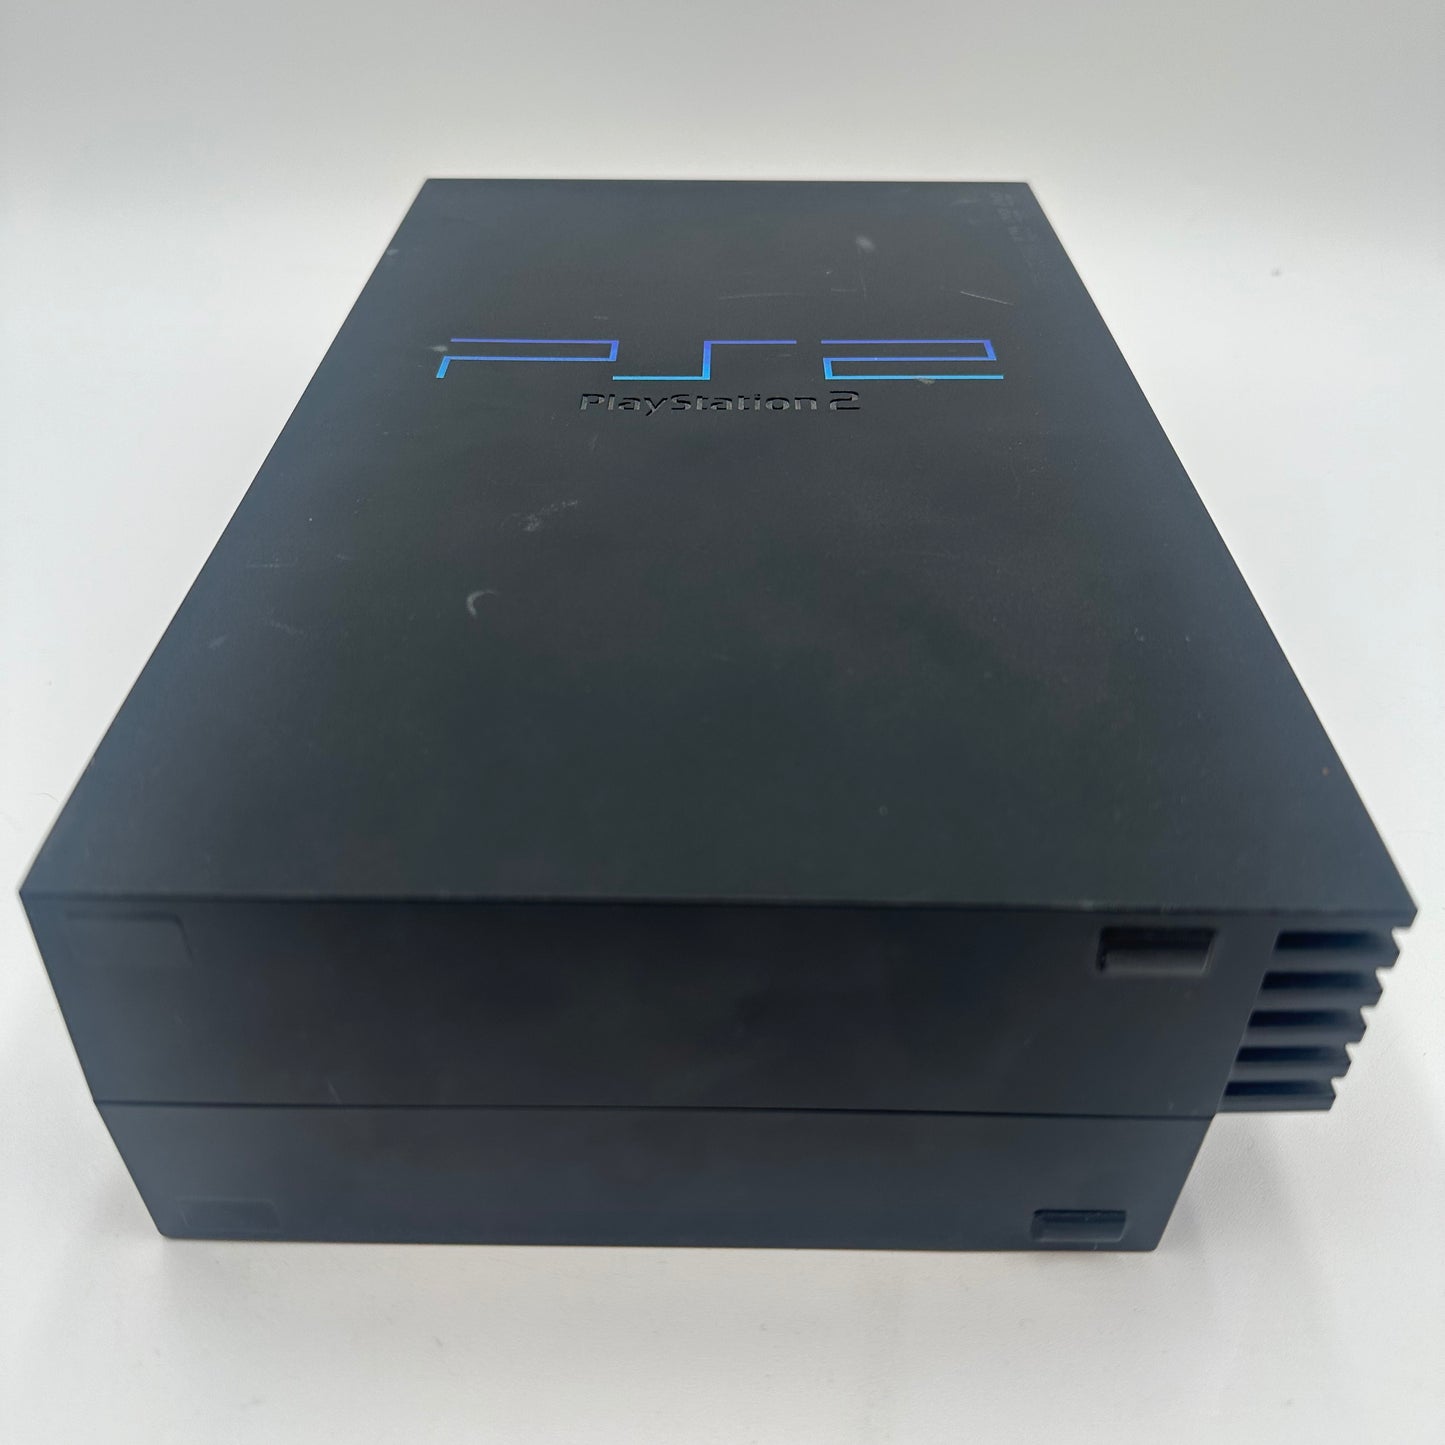 Sony PlayStation 2 PS2 16GB Black Console Gaming System SCPH-30001